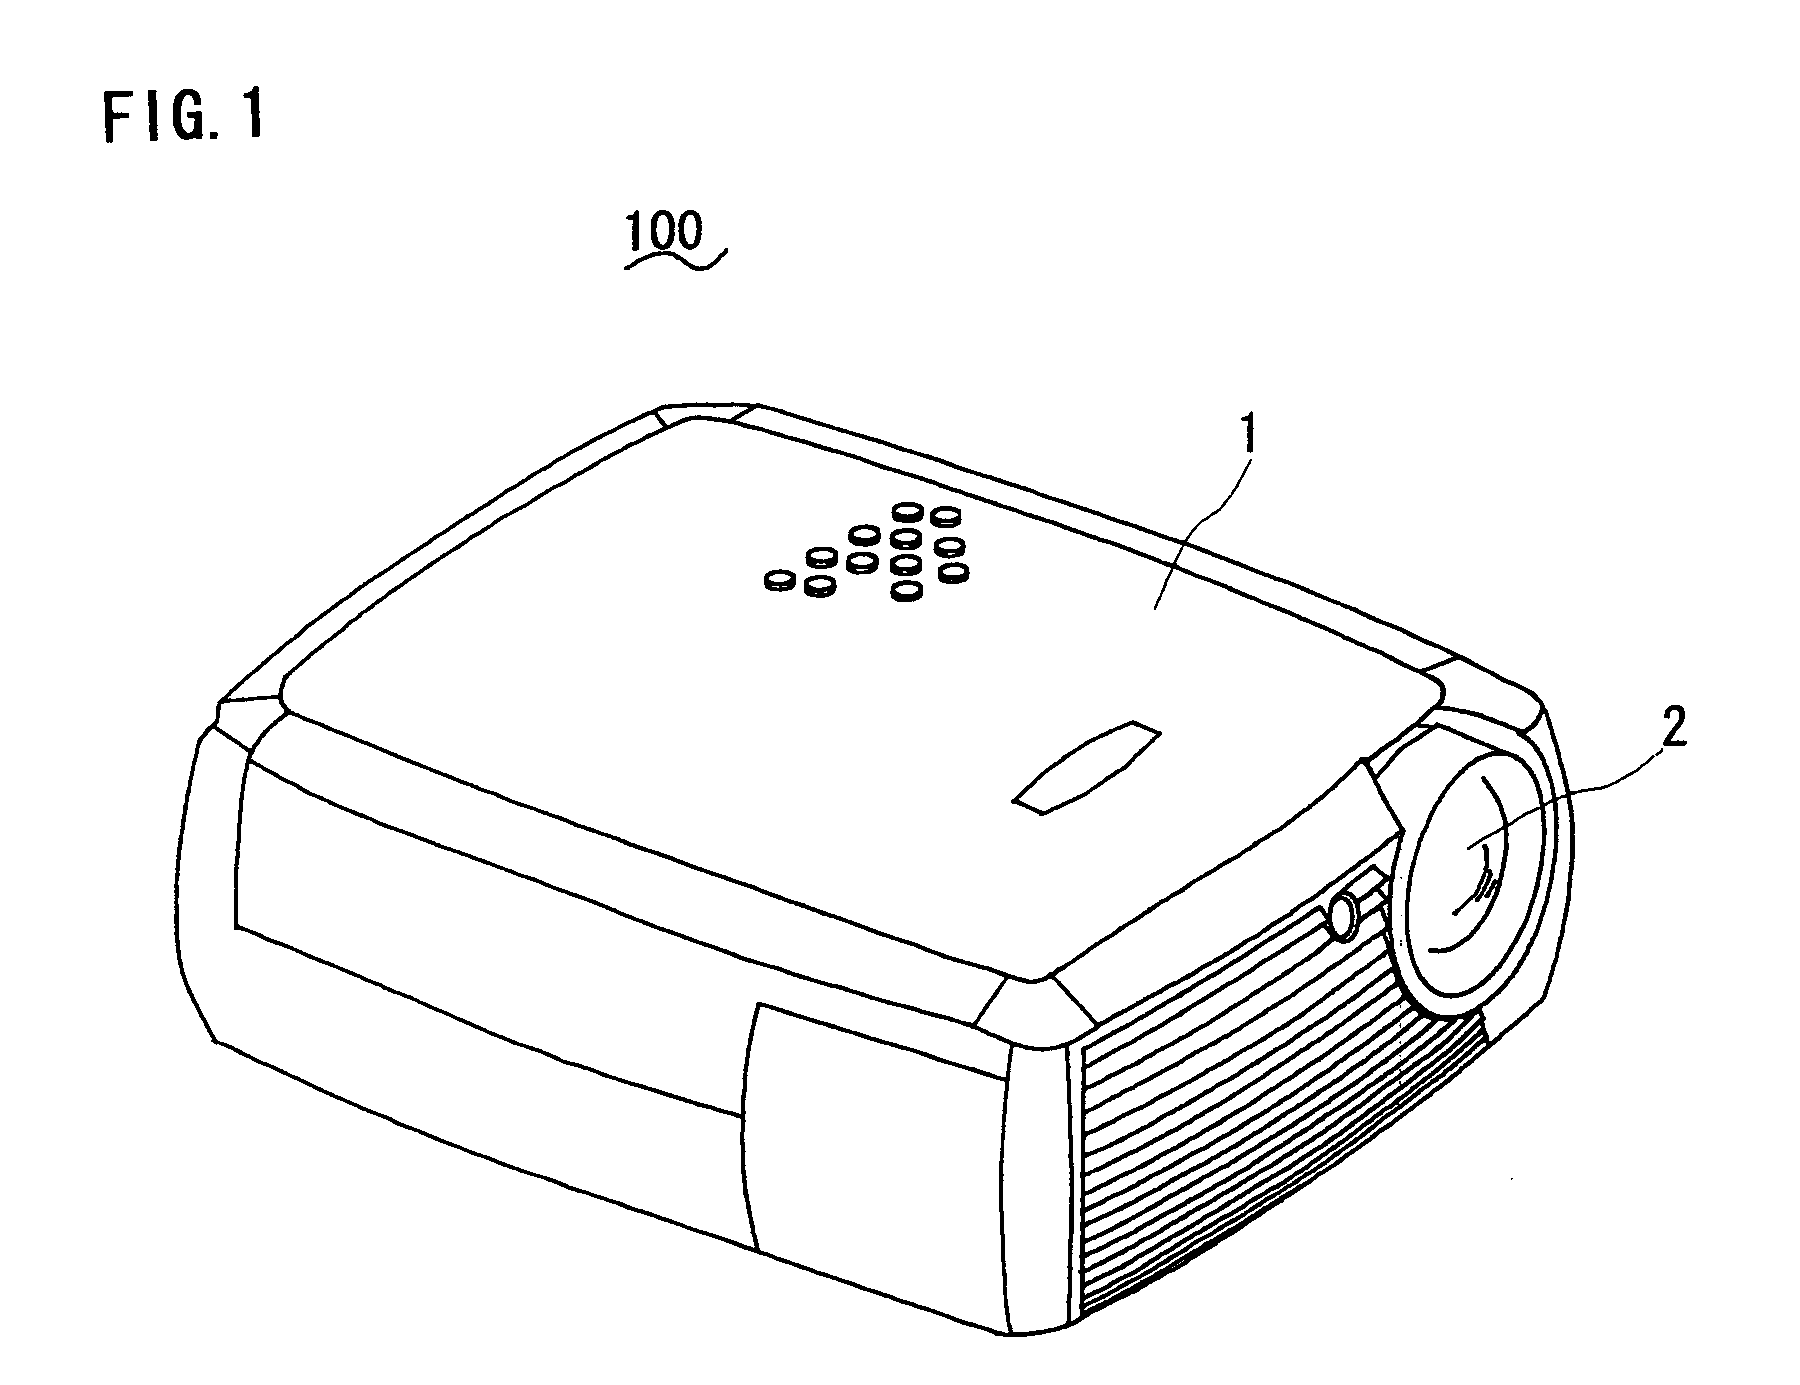 Image displaying projector with a light tunnel and light tunnel structure in an image displaying projector